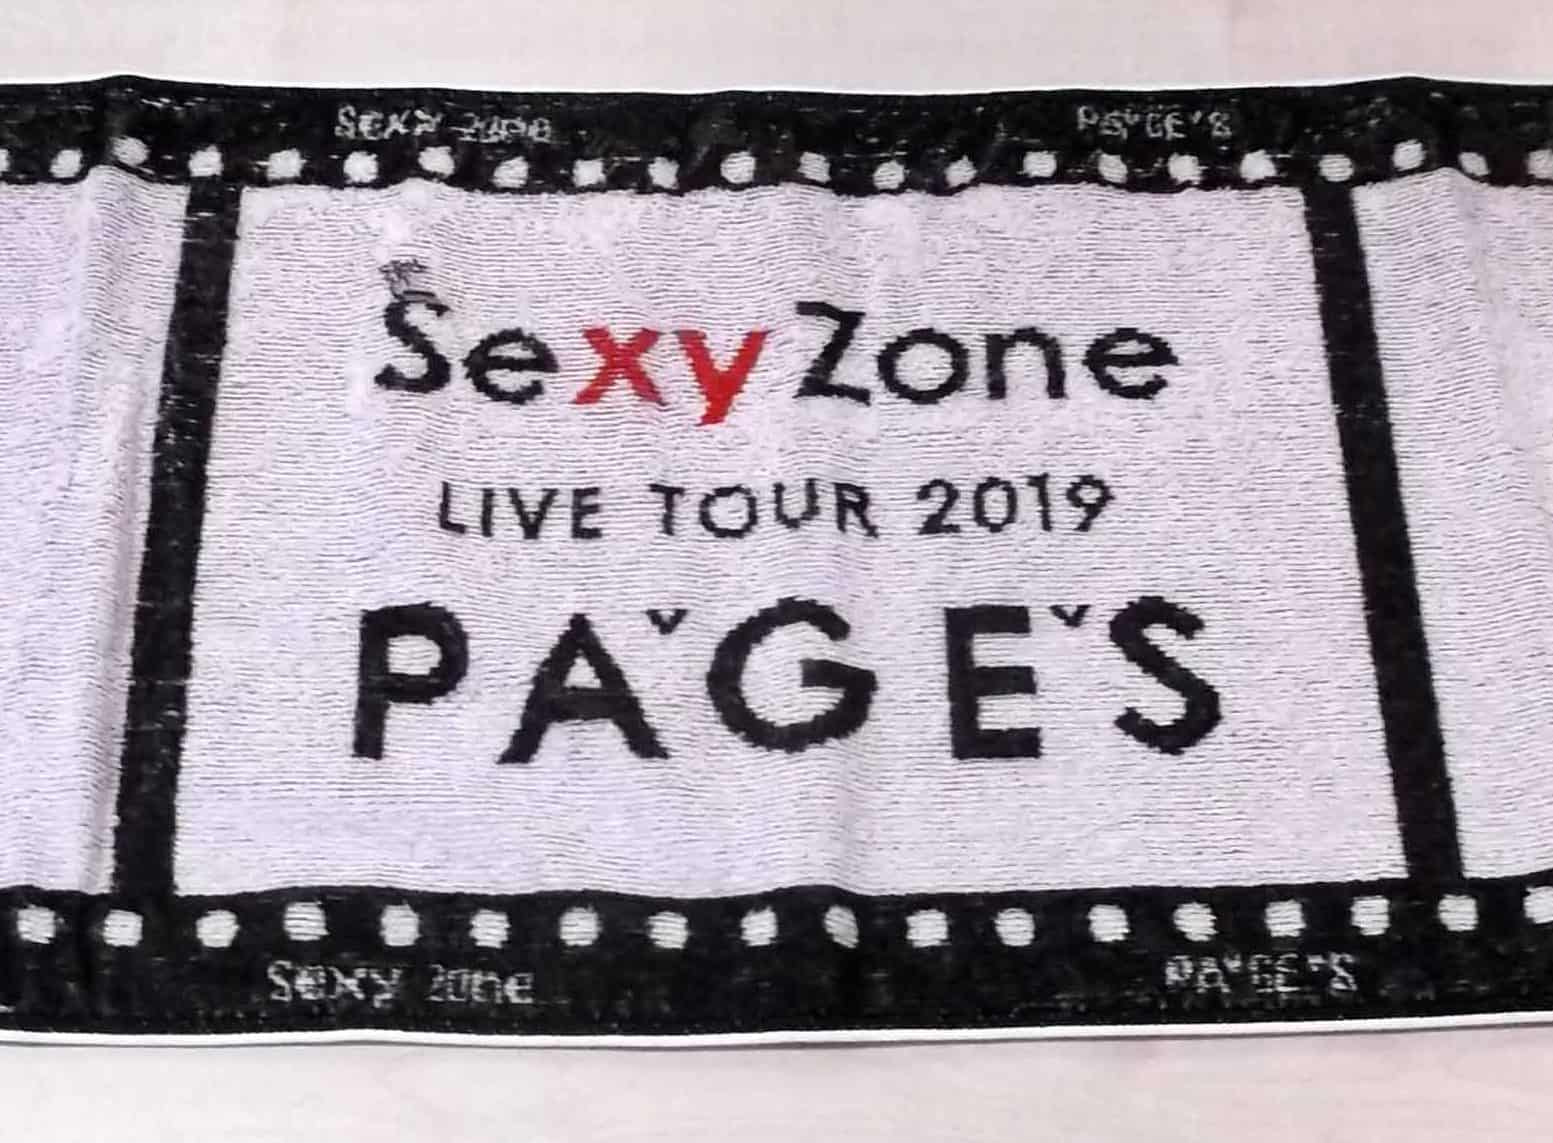 Sexy Zone「PAGES」 全グッズの動画・画像紹介(2019年)